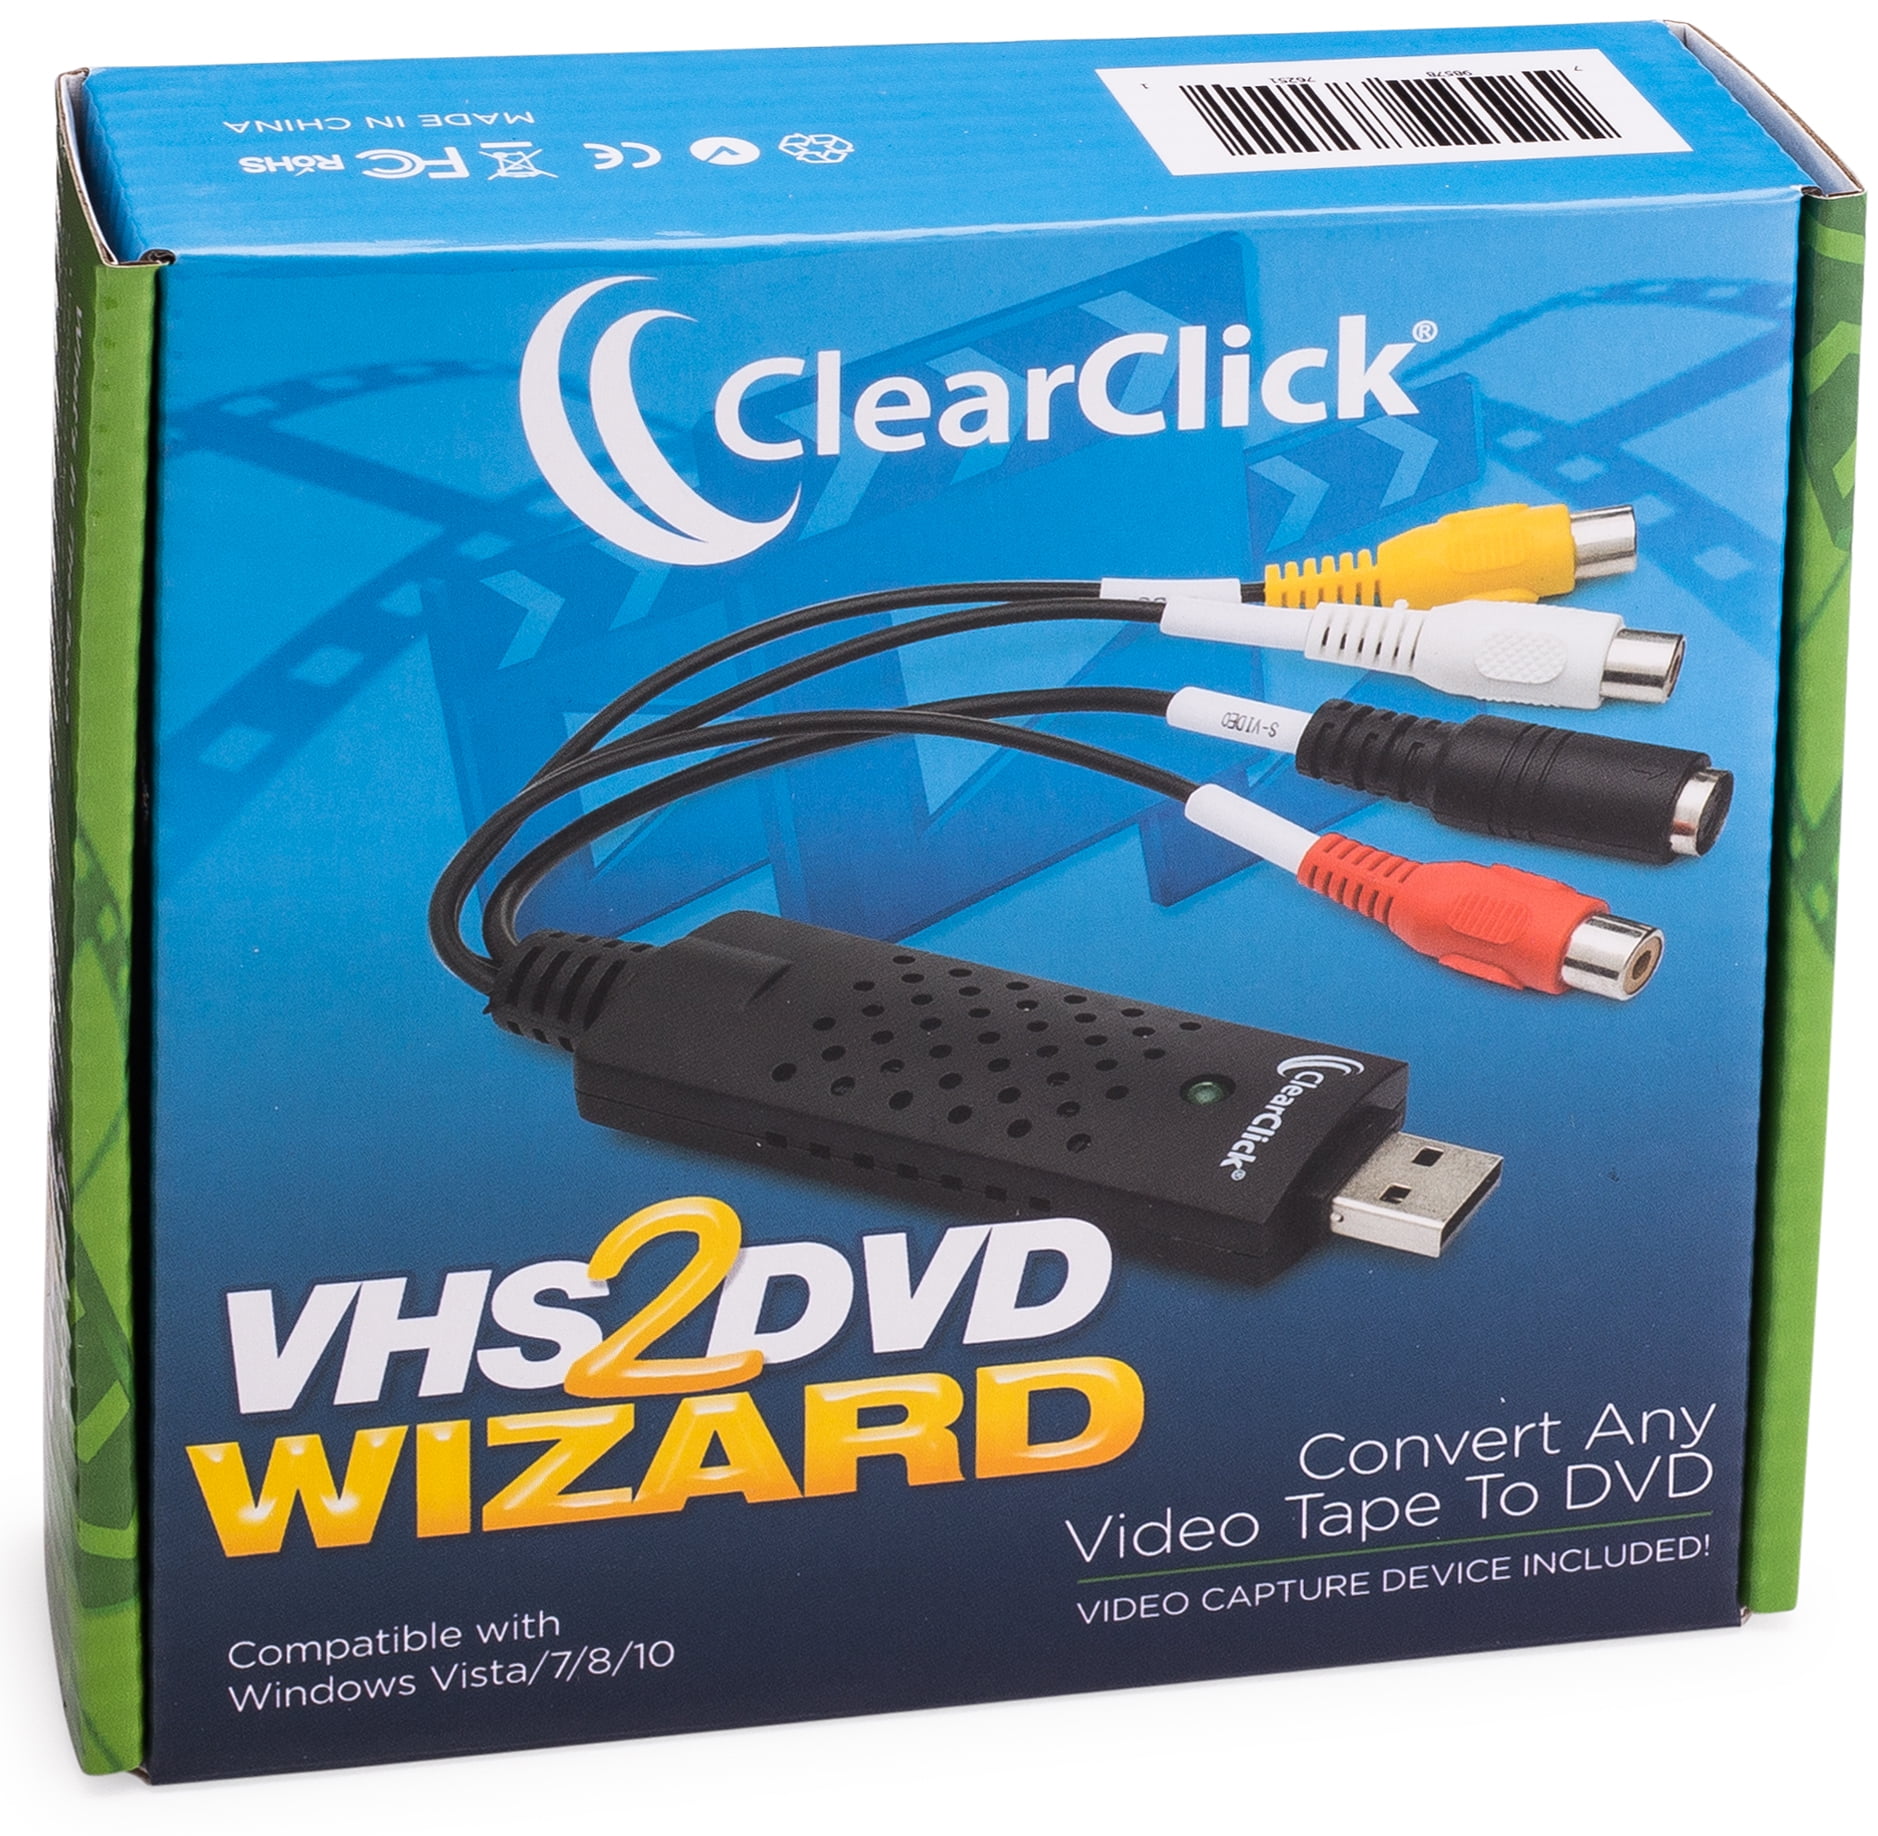 ClearClick VHS to DVD Wizard Software USB Capture (DVD) - Walmart.com